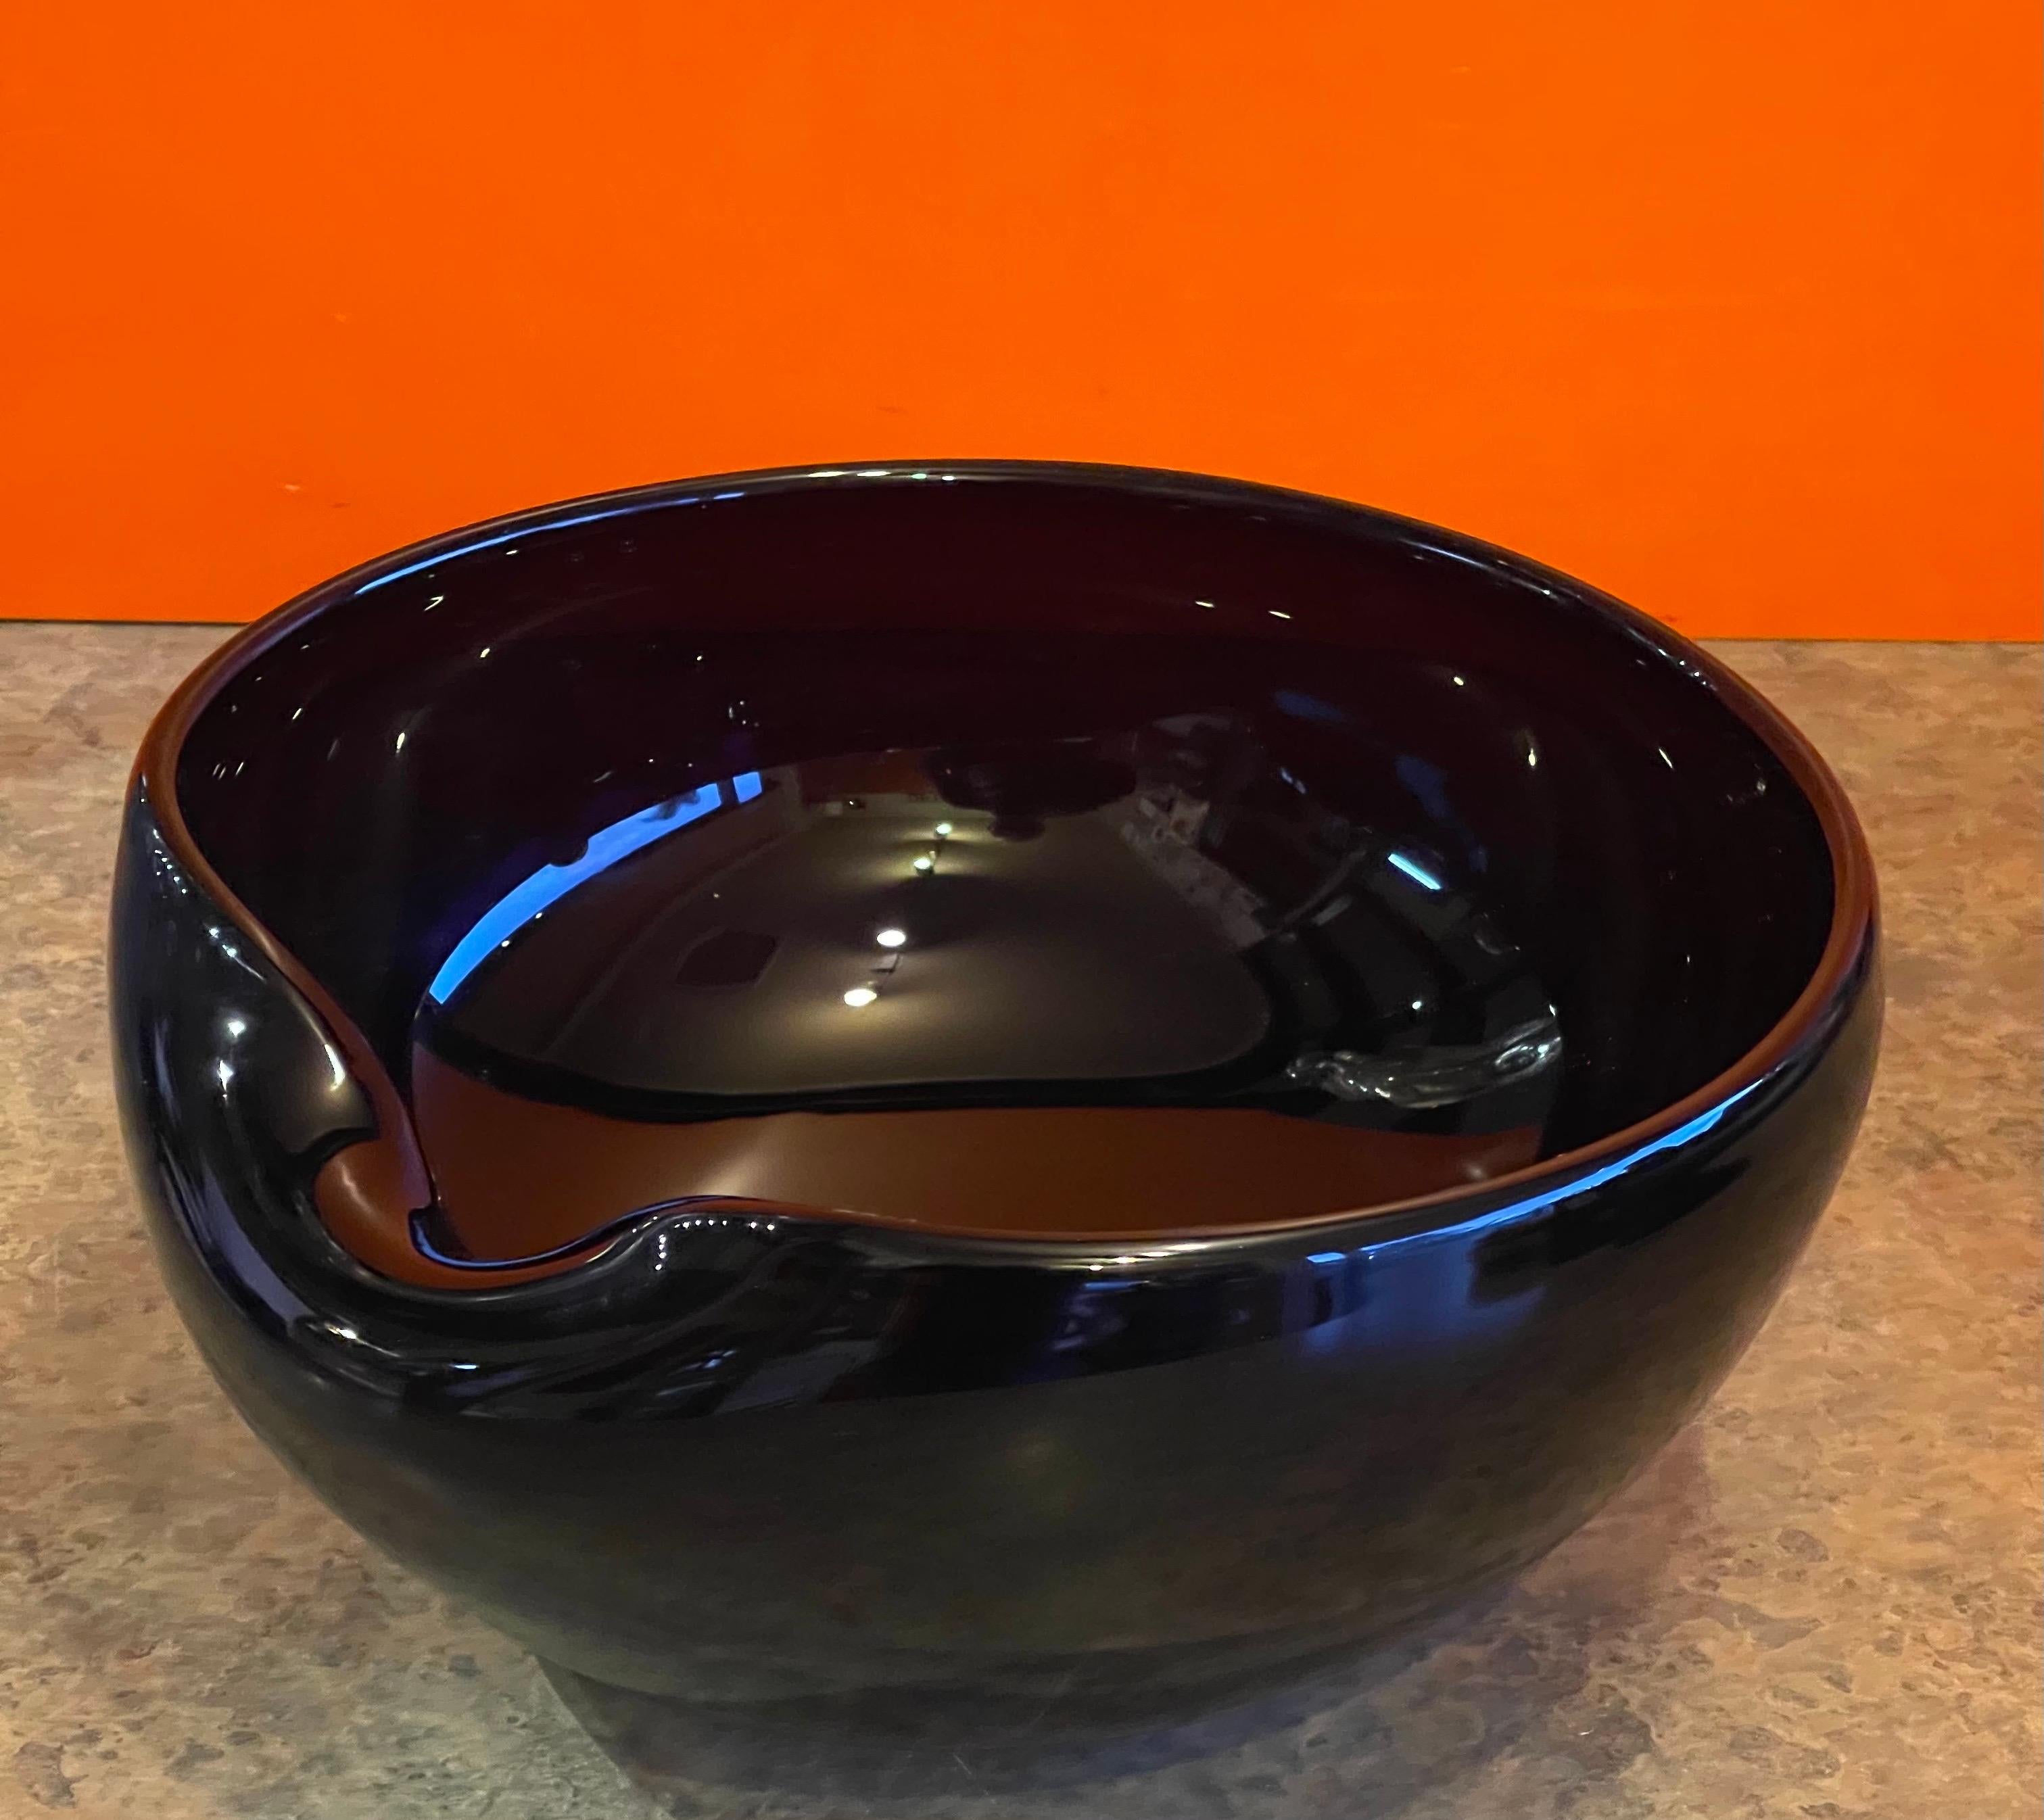 American Black Thumbprint Art Glass Centerpiece Bowl by Elsa Peretti for Tiffany and Co.